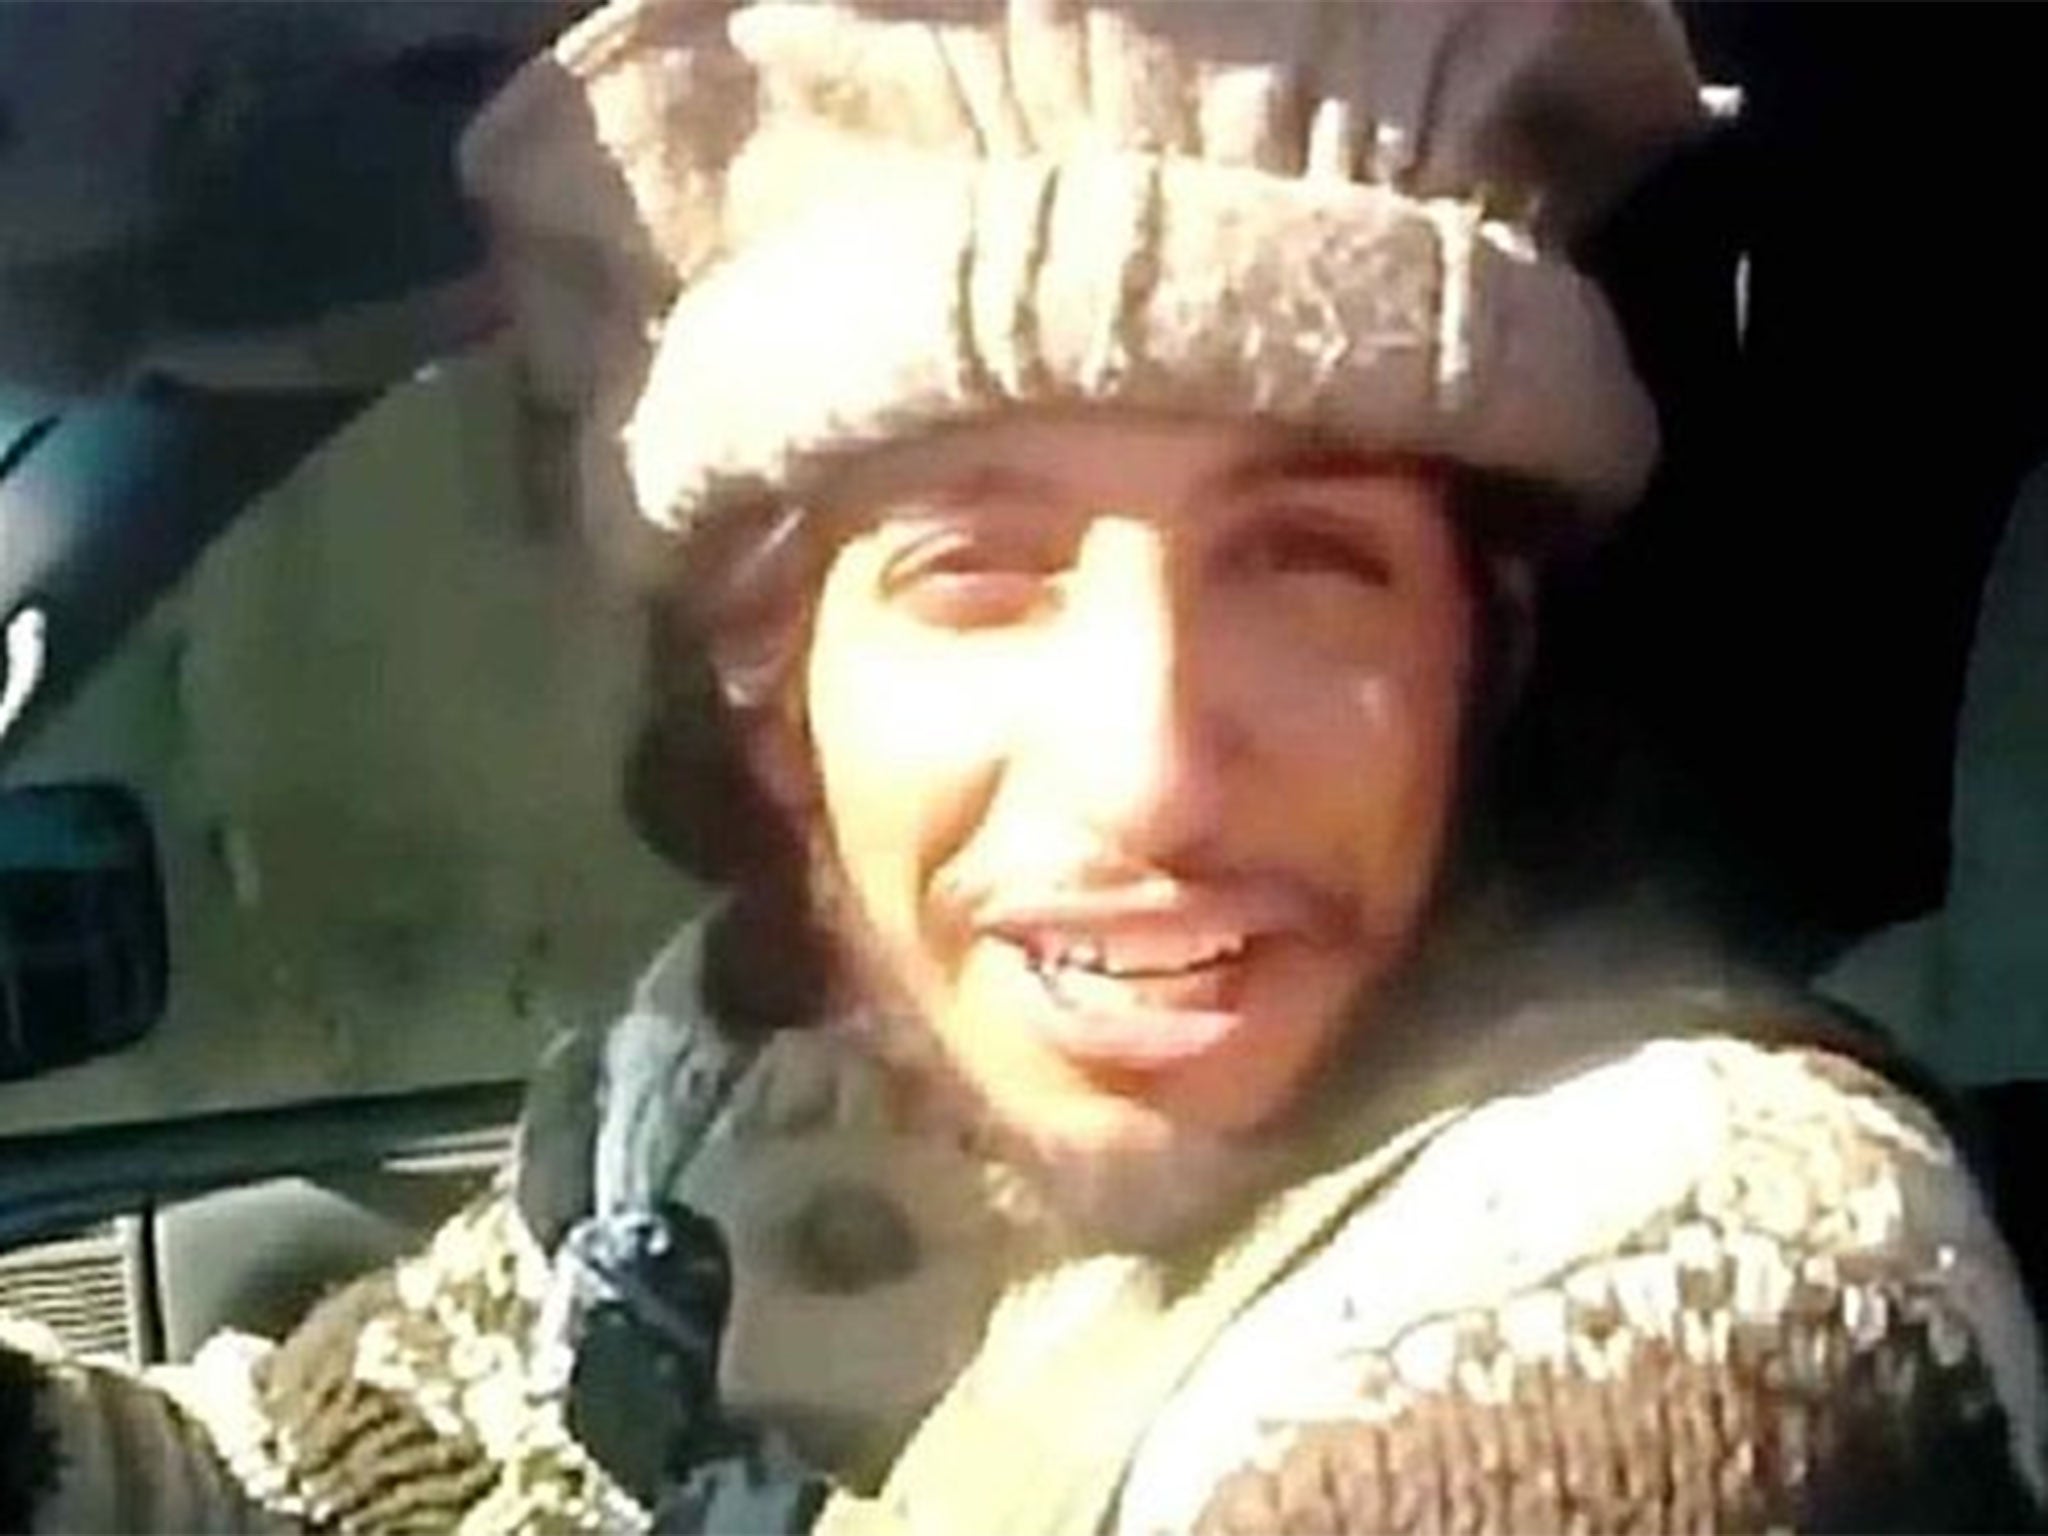 Officials have identified the suspected mastermind as Abdelhamid Abaaoud, a 27 year old Belgian of Moroccan origin